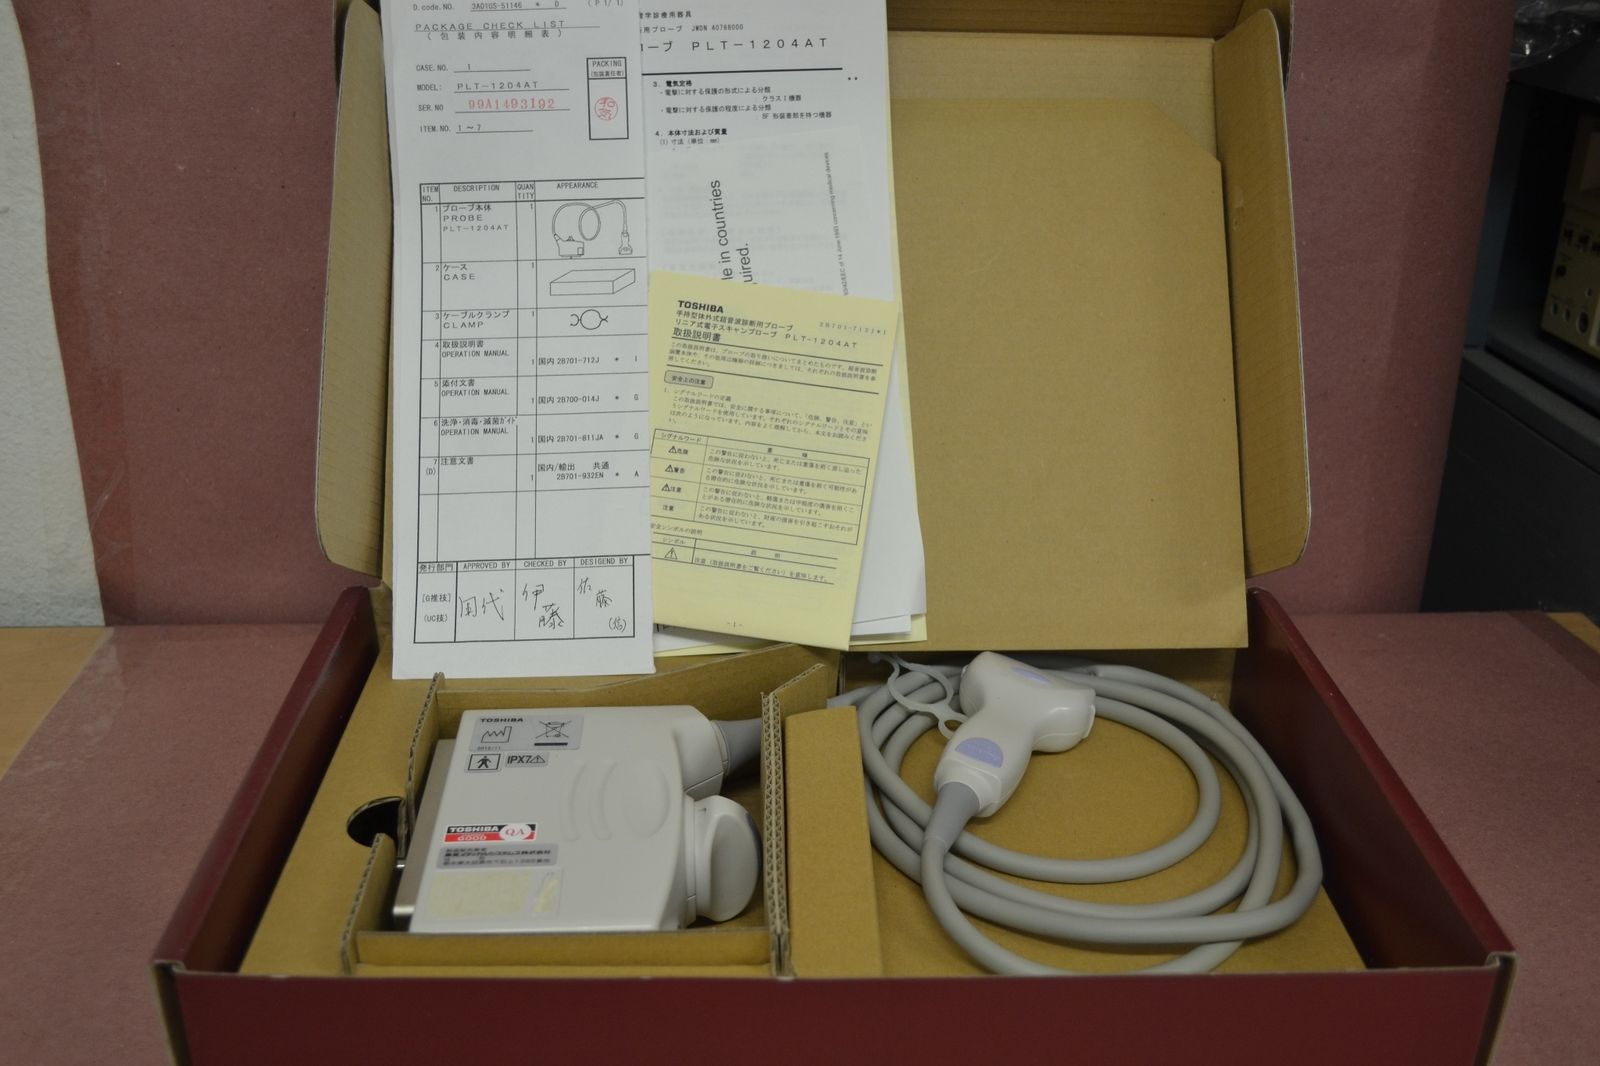 Toshiba PLT-1204AT 4-7MHz Linear Ultrasound Transducer Probe DIAGNOSTIC ULTRASOUND MACHINES FOR SALE